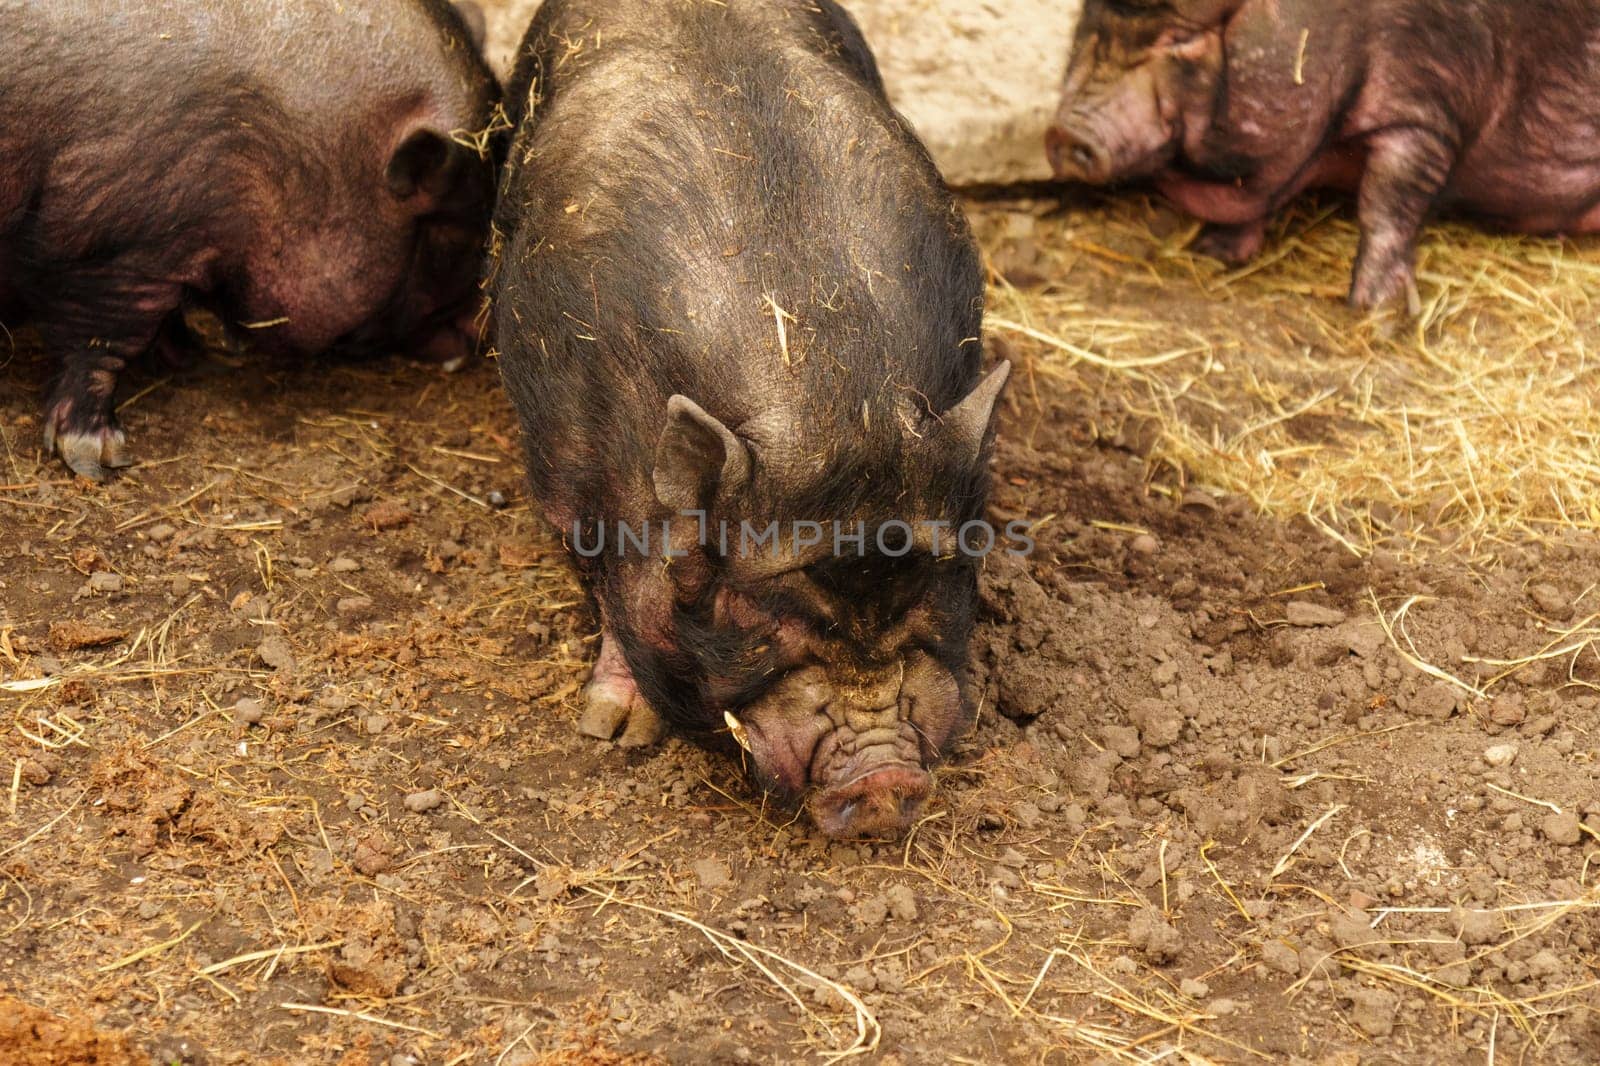 A pig is seen standing in the dirt near a door on a farm. Selective focus by darksoul72